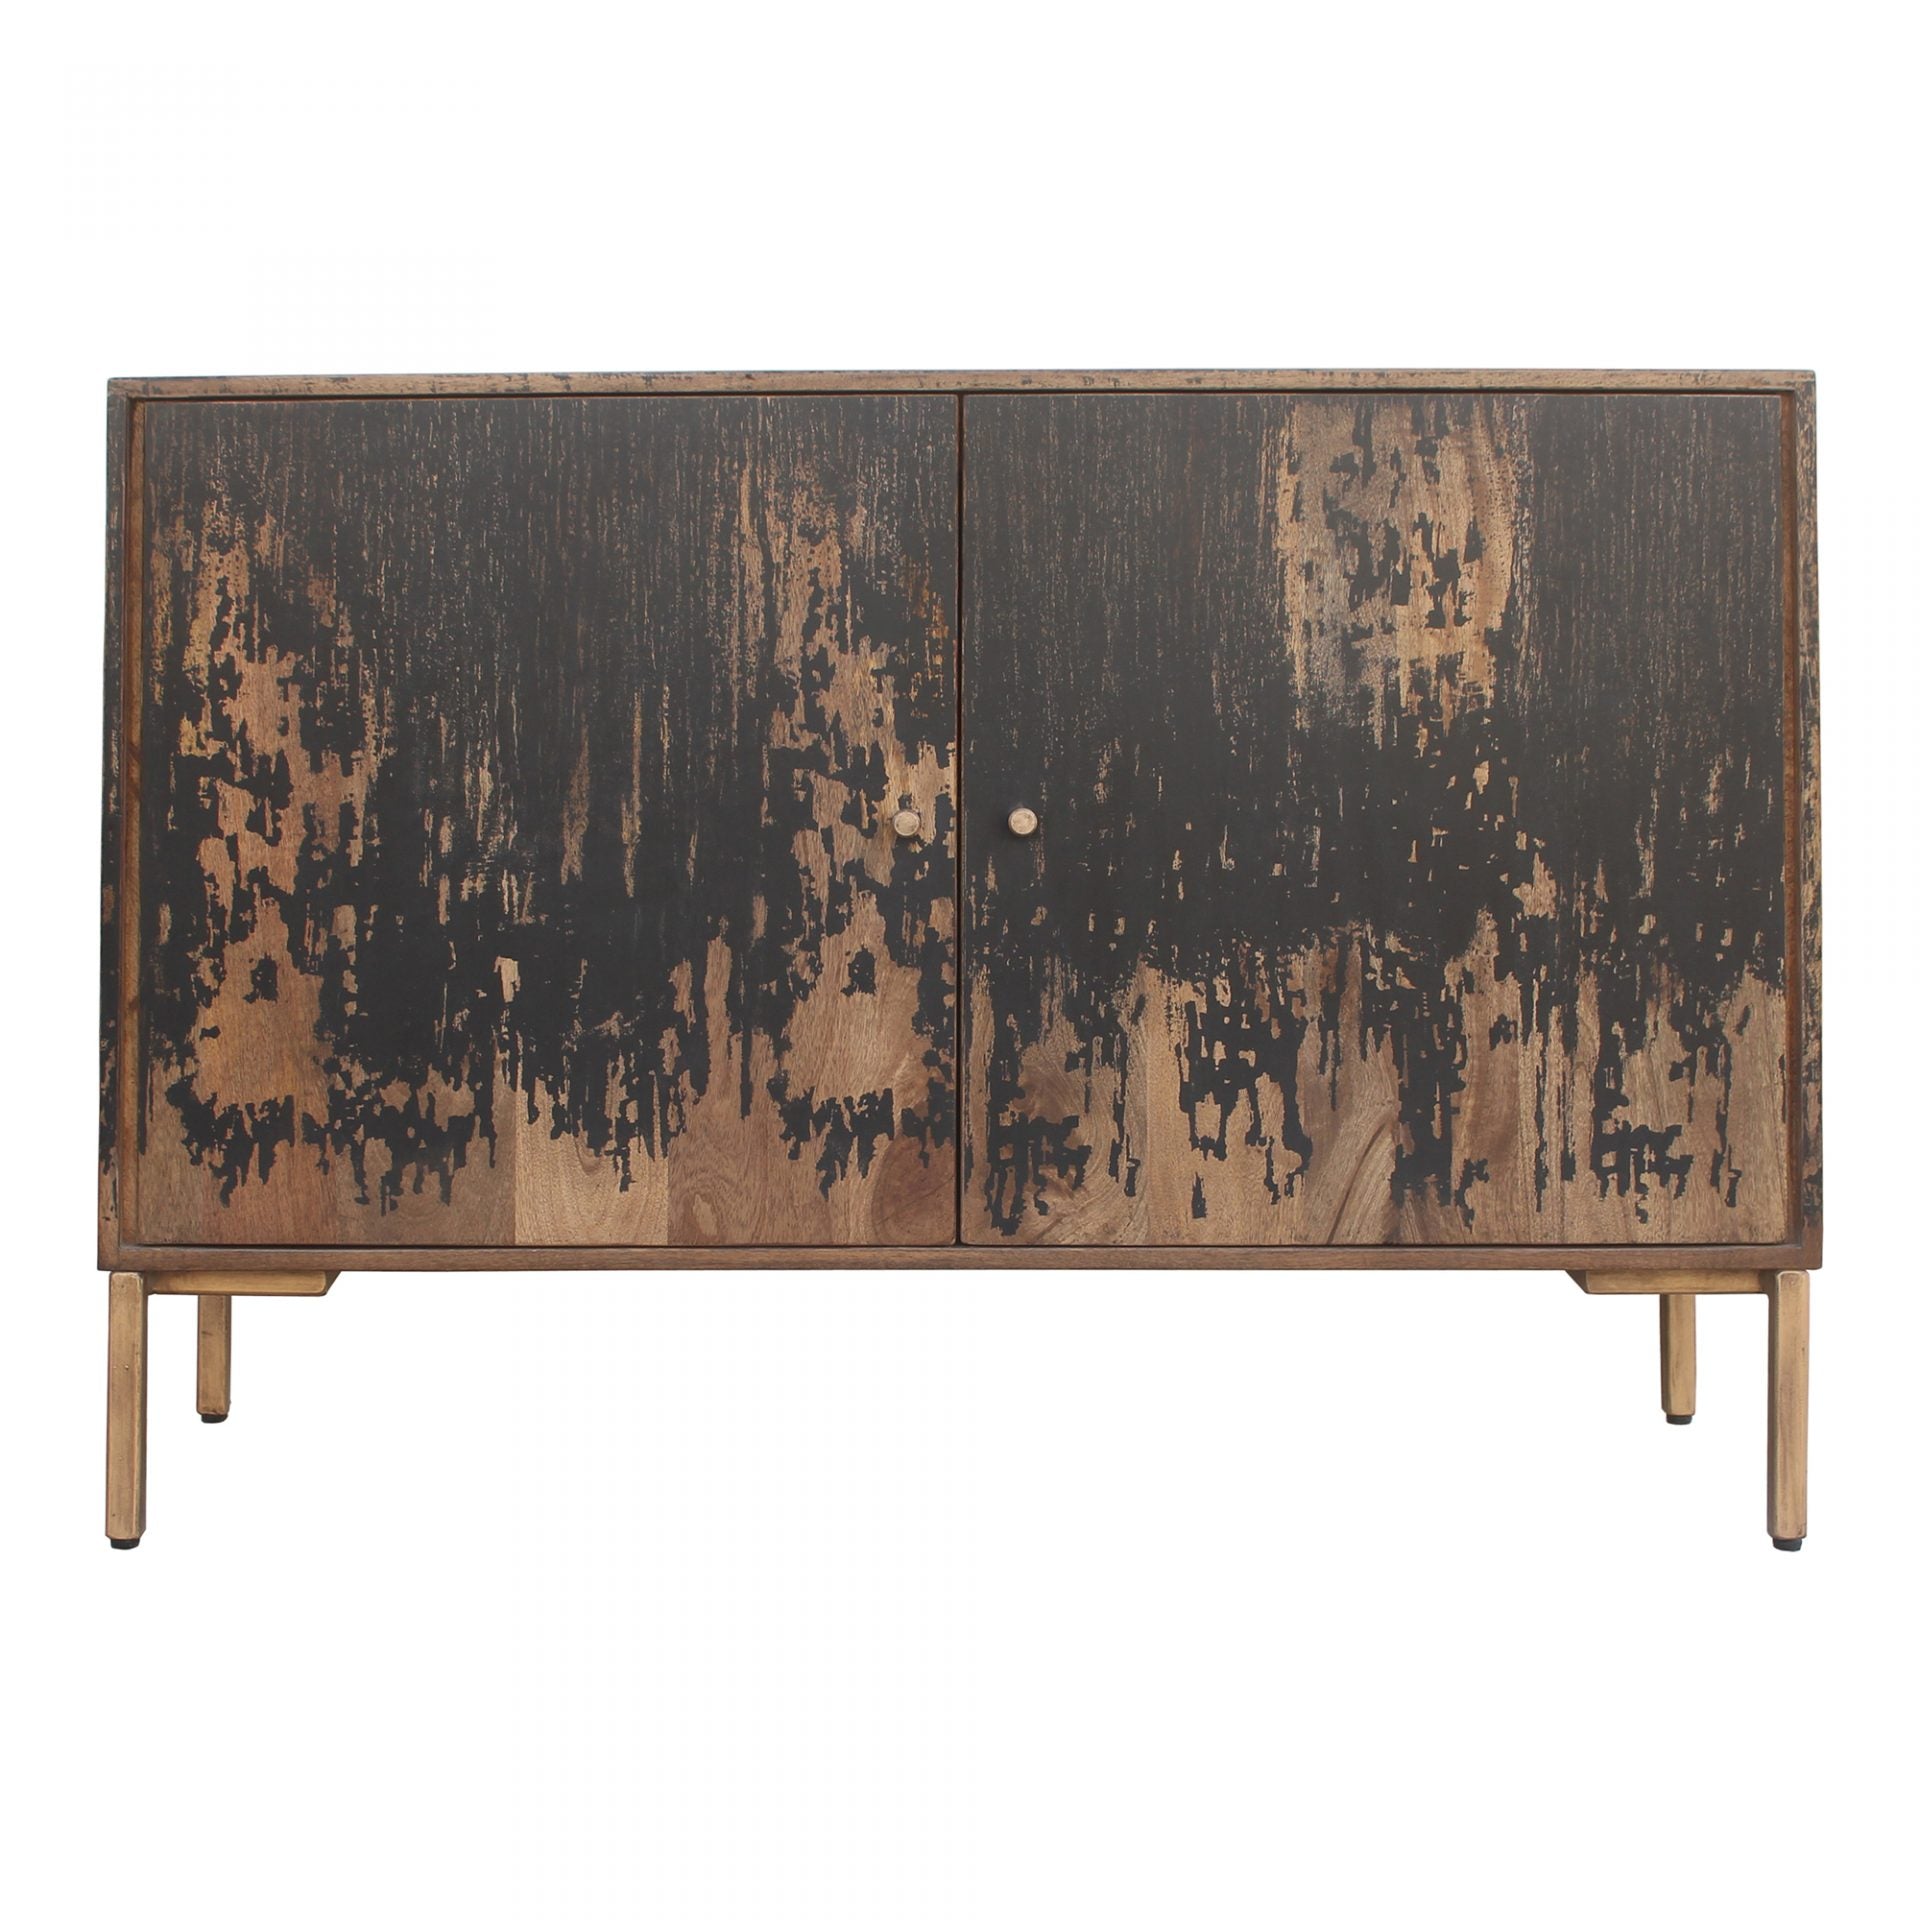 The rustic look to this Artists Small Sideboard is extremely versatile, fitting both the industrial and farmhouse aesthetics. The golden knobs open to shelves, perfect for those families needing extra storage.   Size: 48"W x 16"D x 33.5"H Material: Solid Mango, Iron Legs